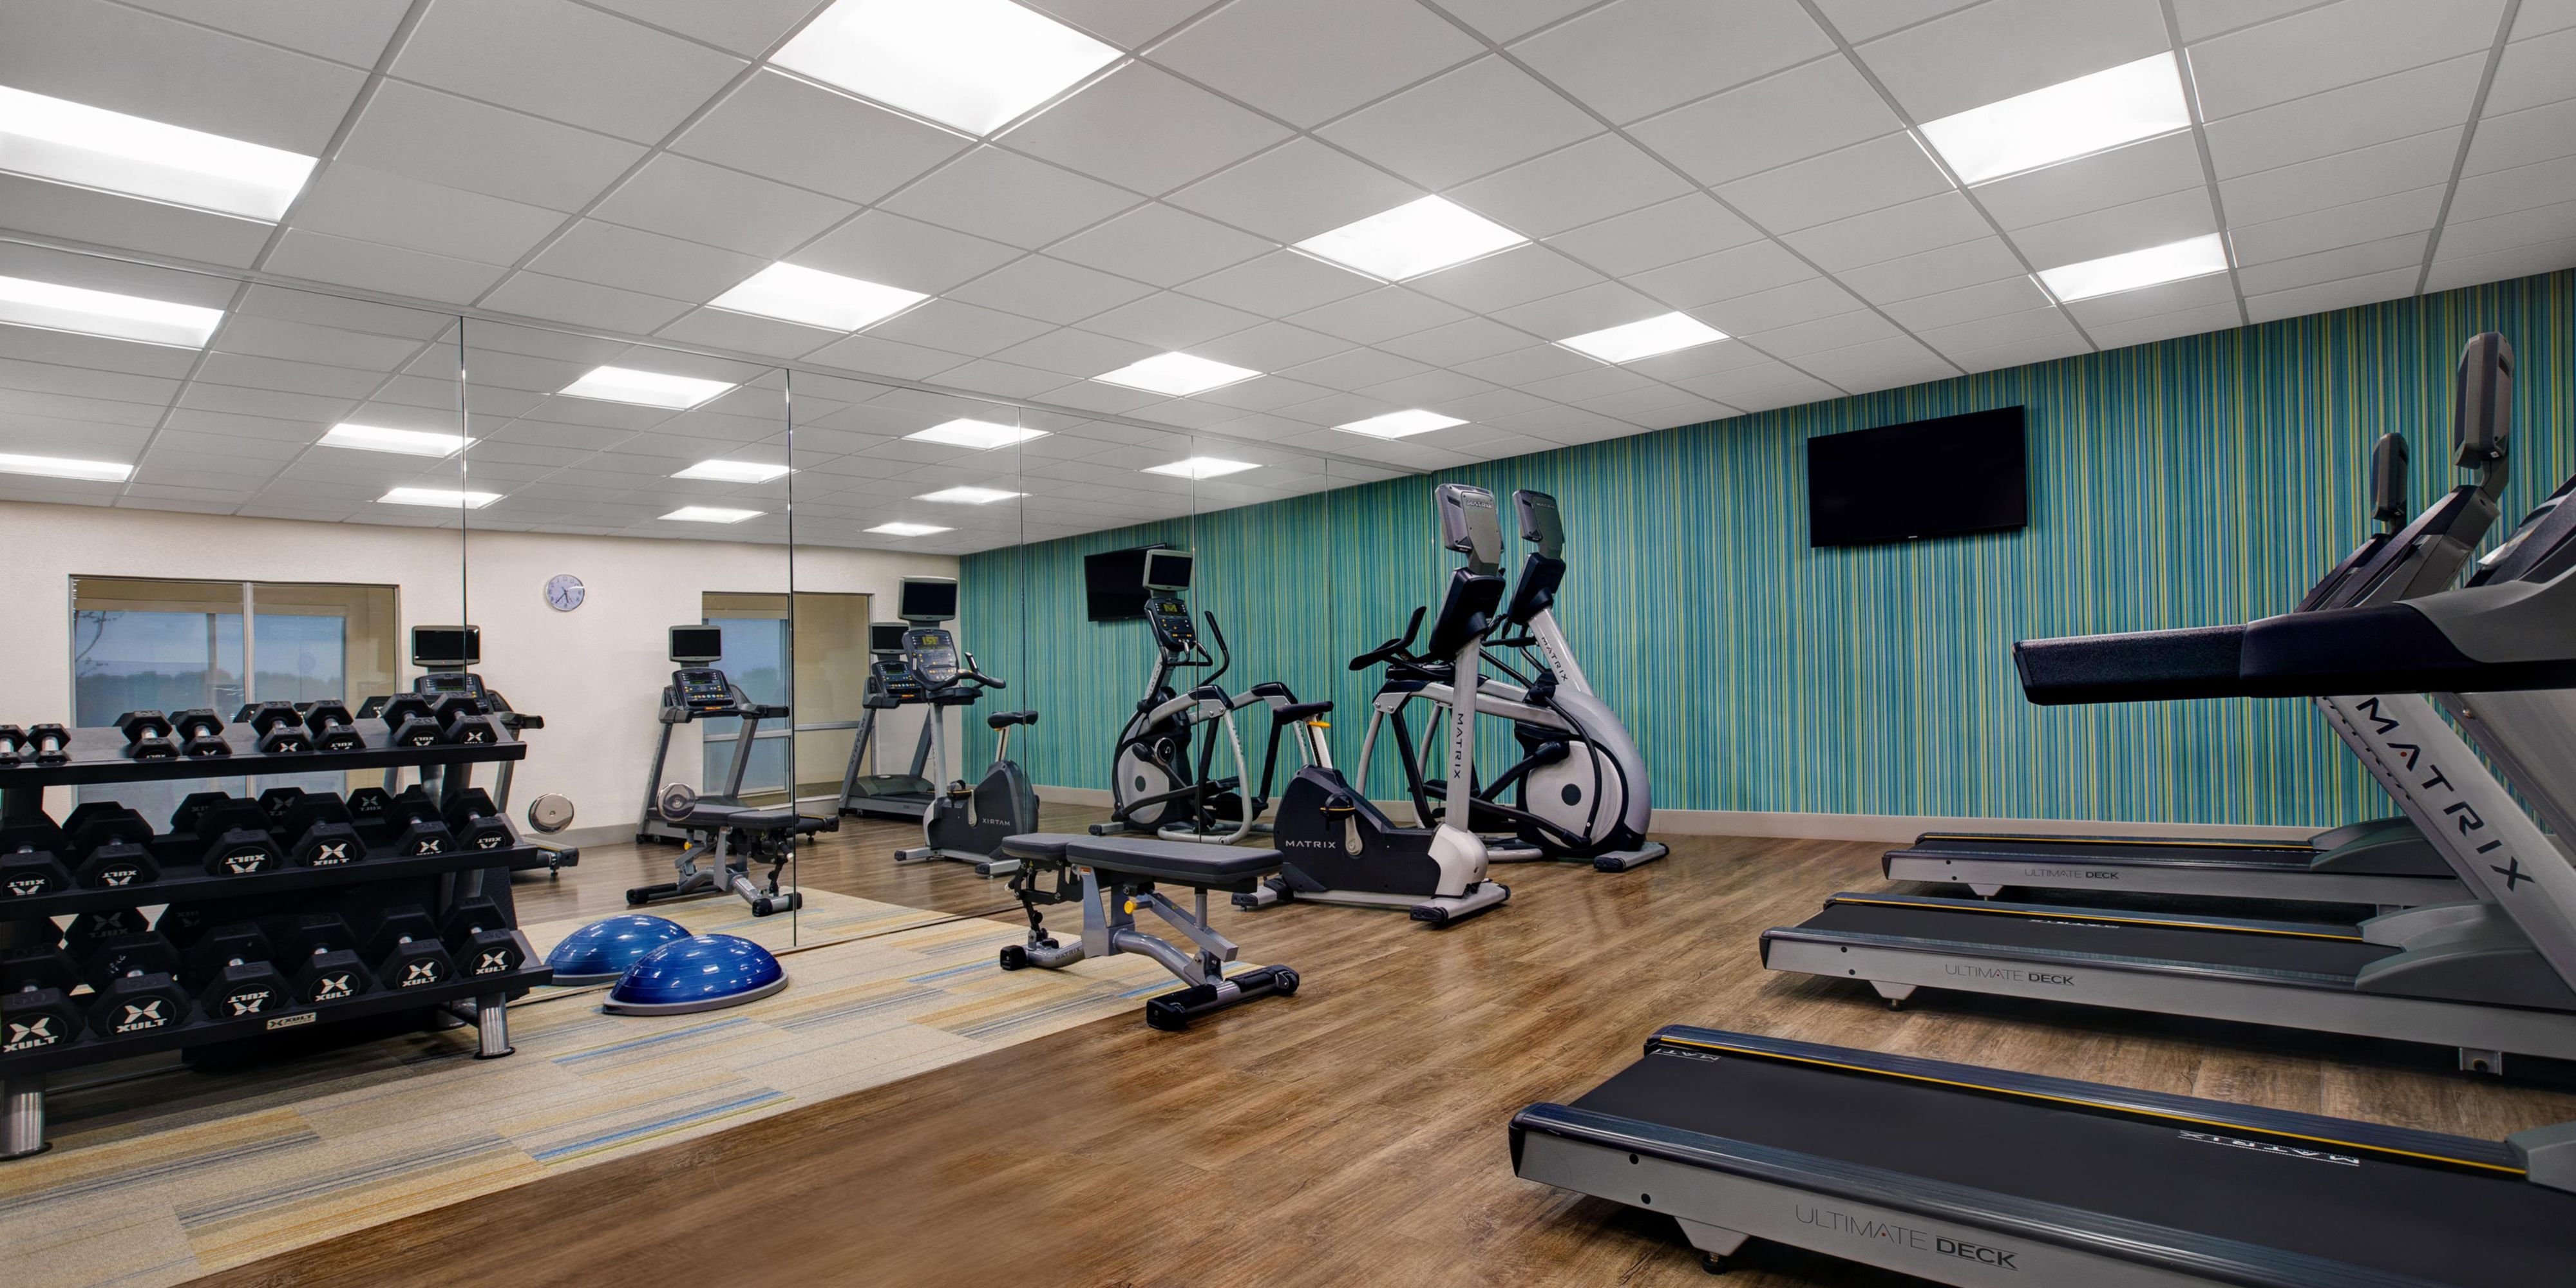 The hotel has a full fitness center available to guests free of charge. We are also right across the street from the top of the line Life Time Athletic Brookfield luxury gym. 
